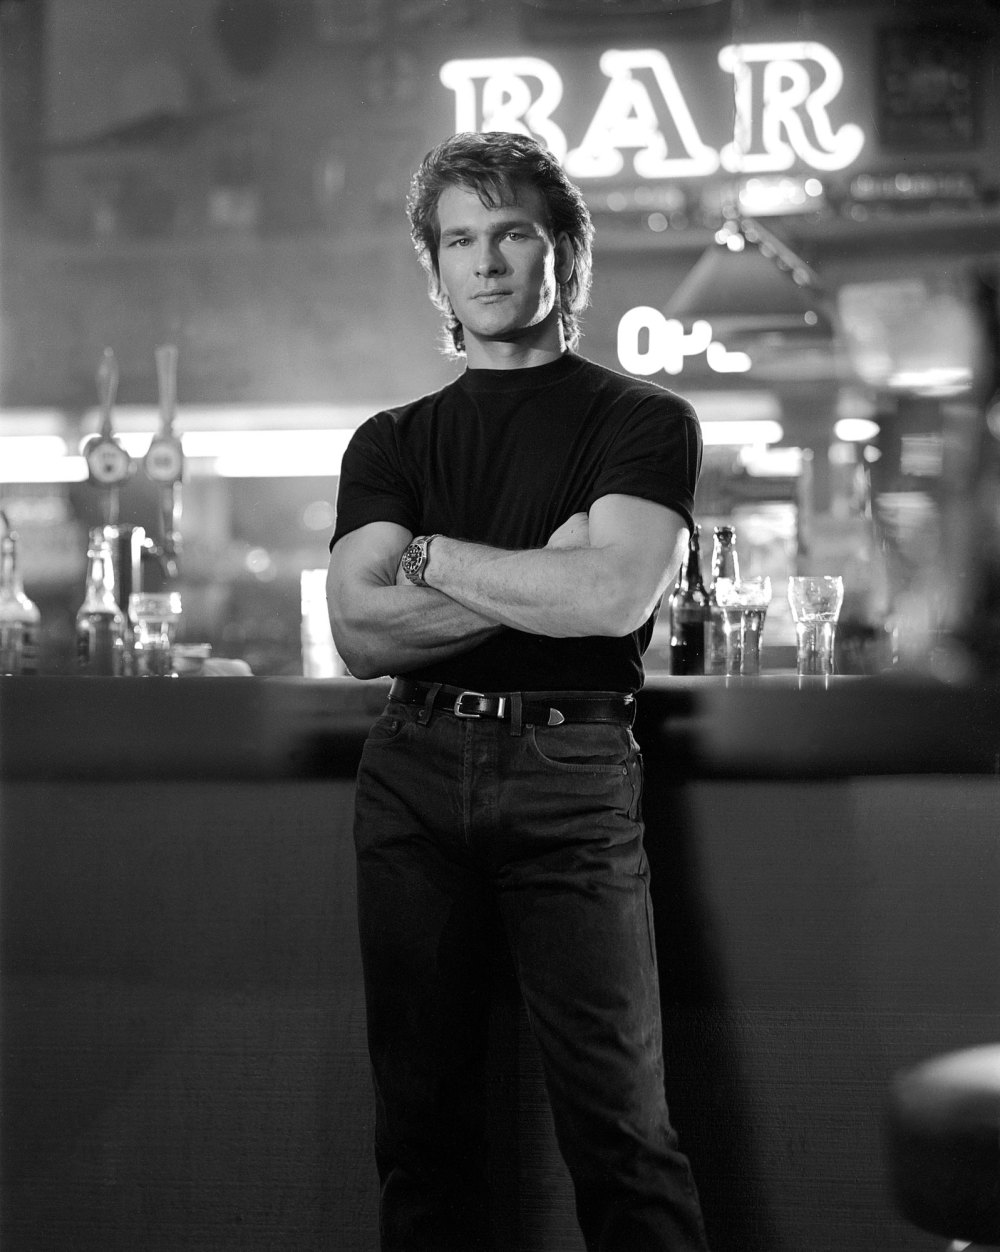 Patrick Swayze was honored at the Road House Remake premiere in New York, Be Nice 283